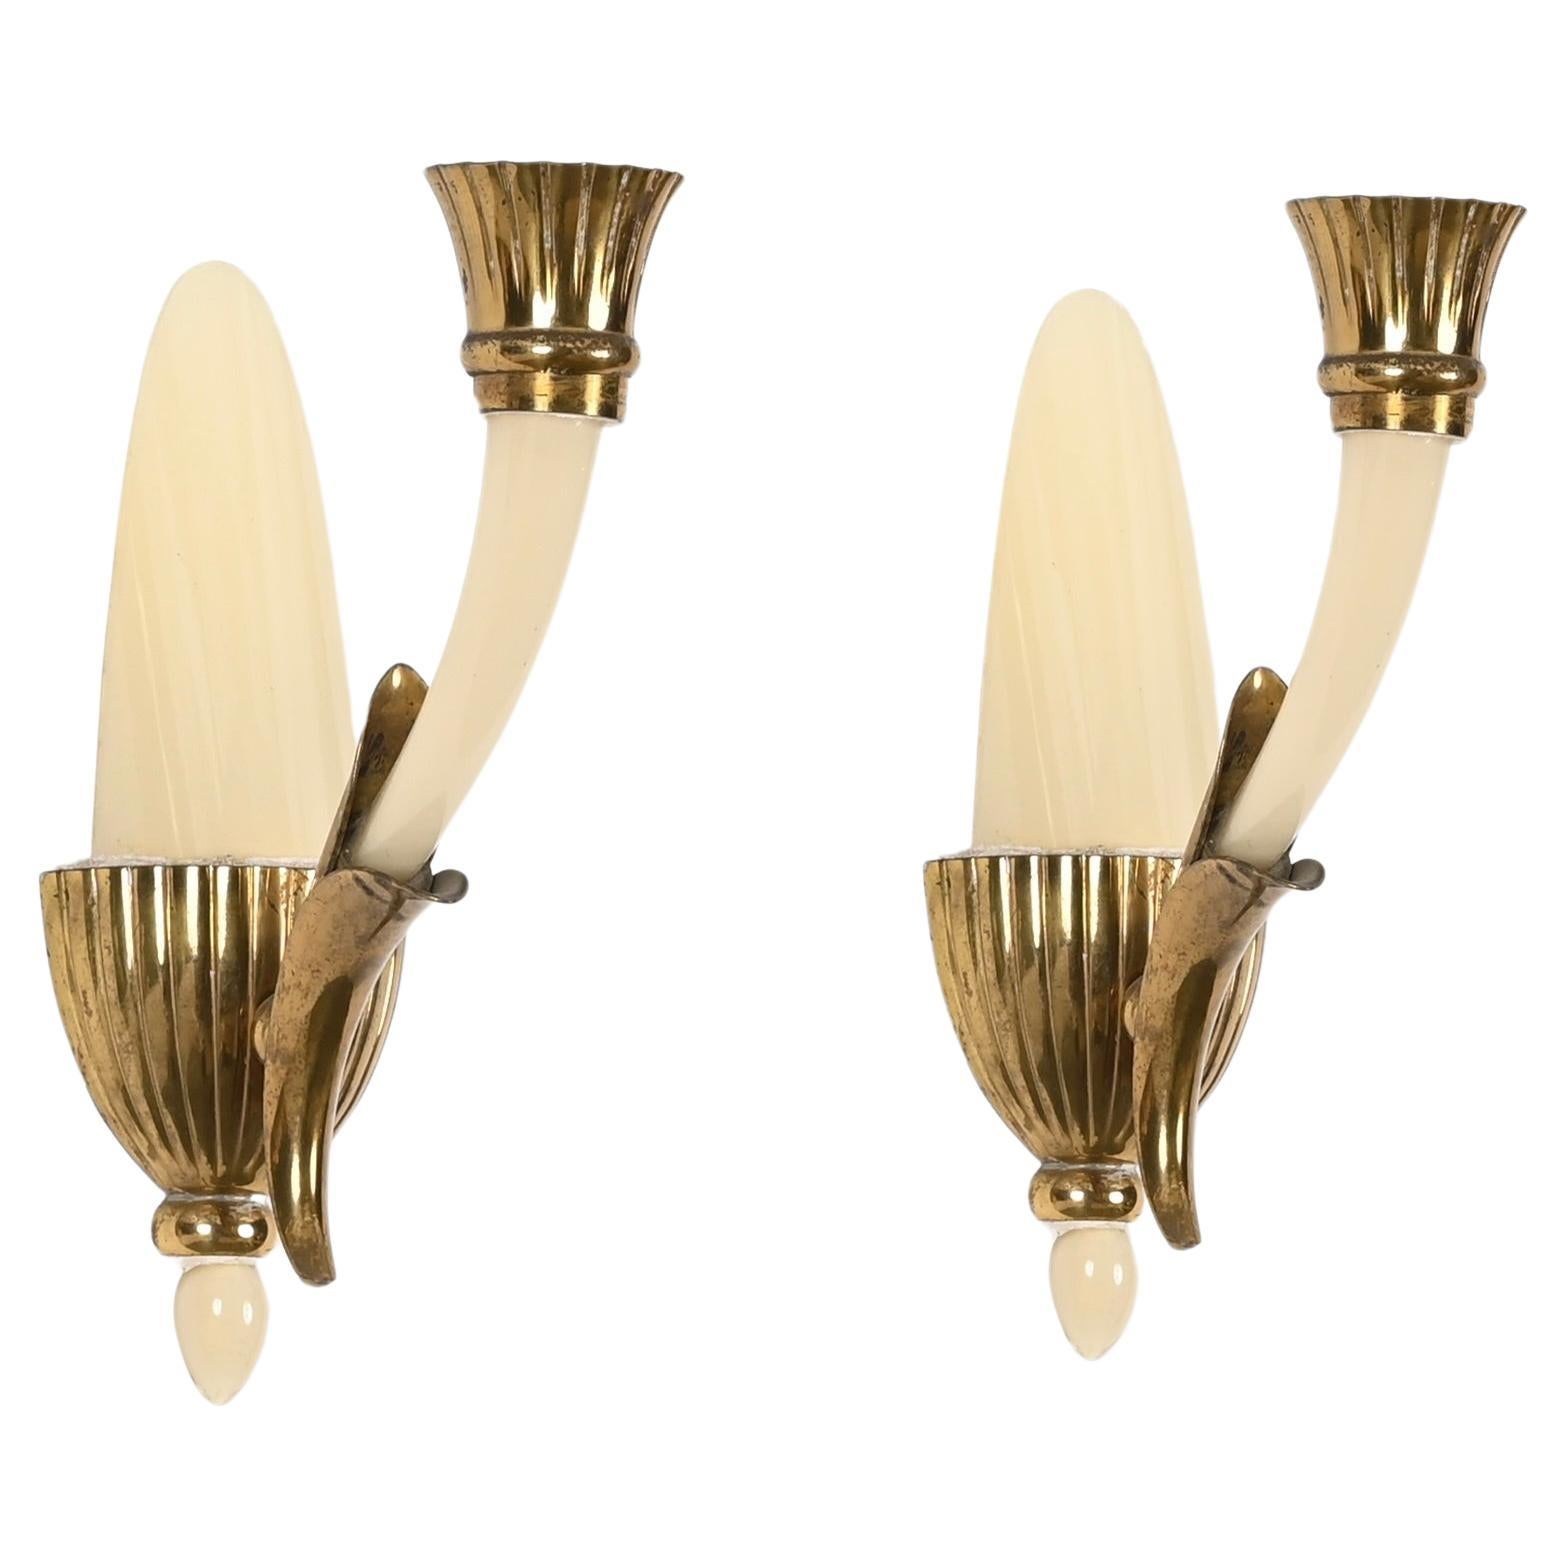 Pair of Italian Sconces in Ivory Murano Glass and Brass by Ulrich, Italy 1940s For Sale